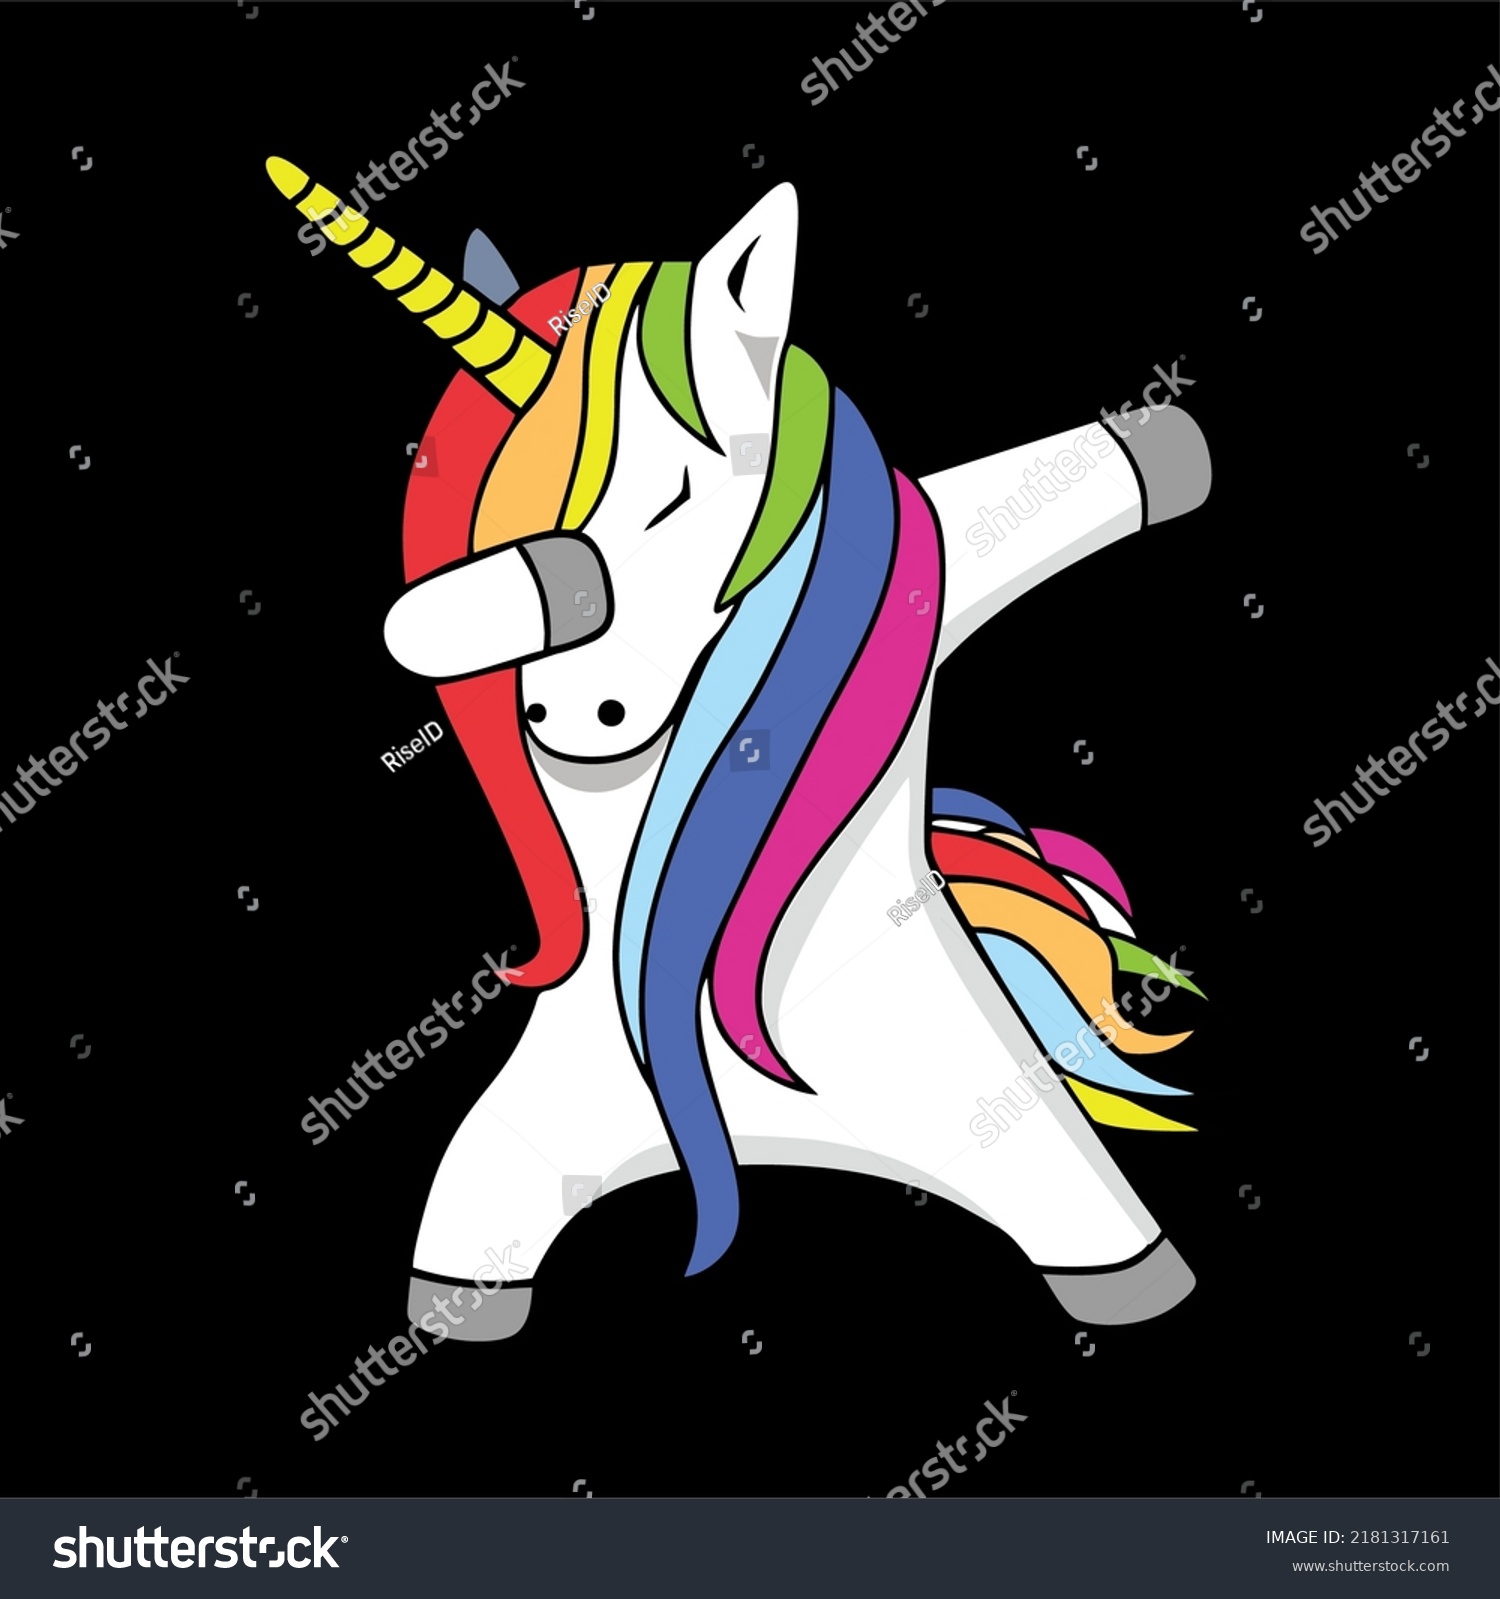 SVG of unicorn dabbing funny and horse animal cute svg